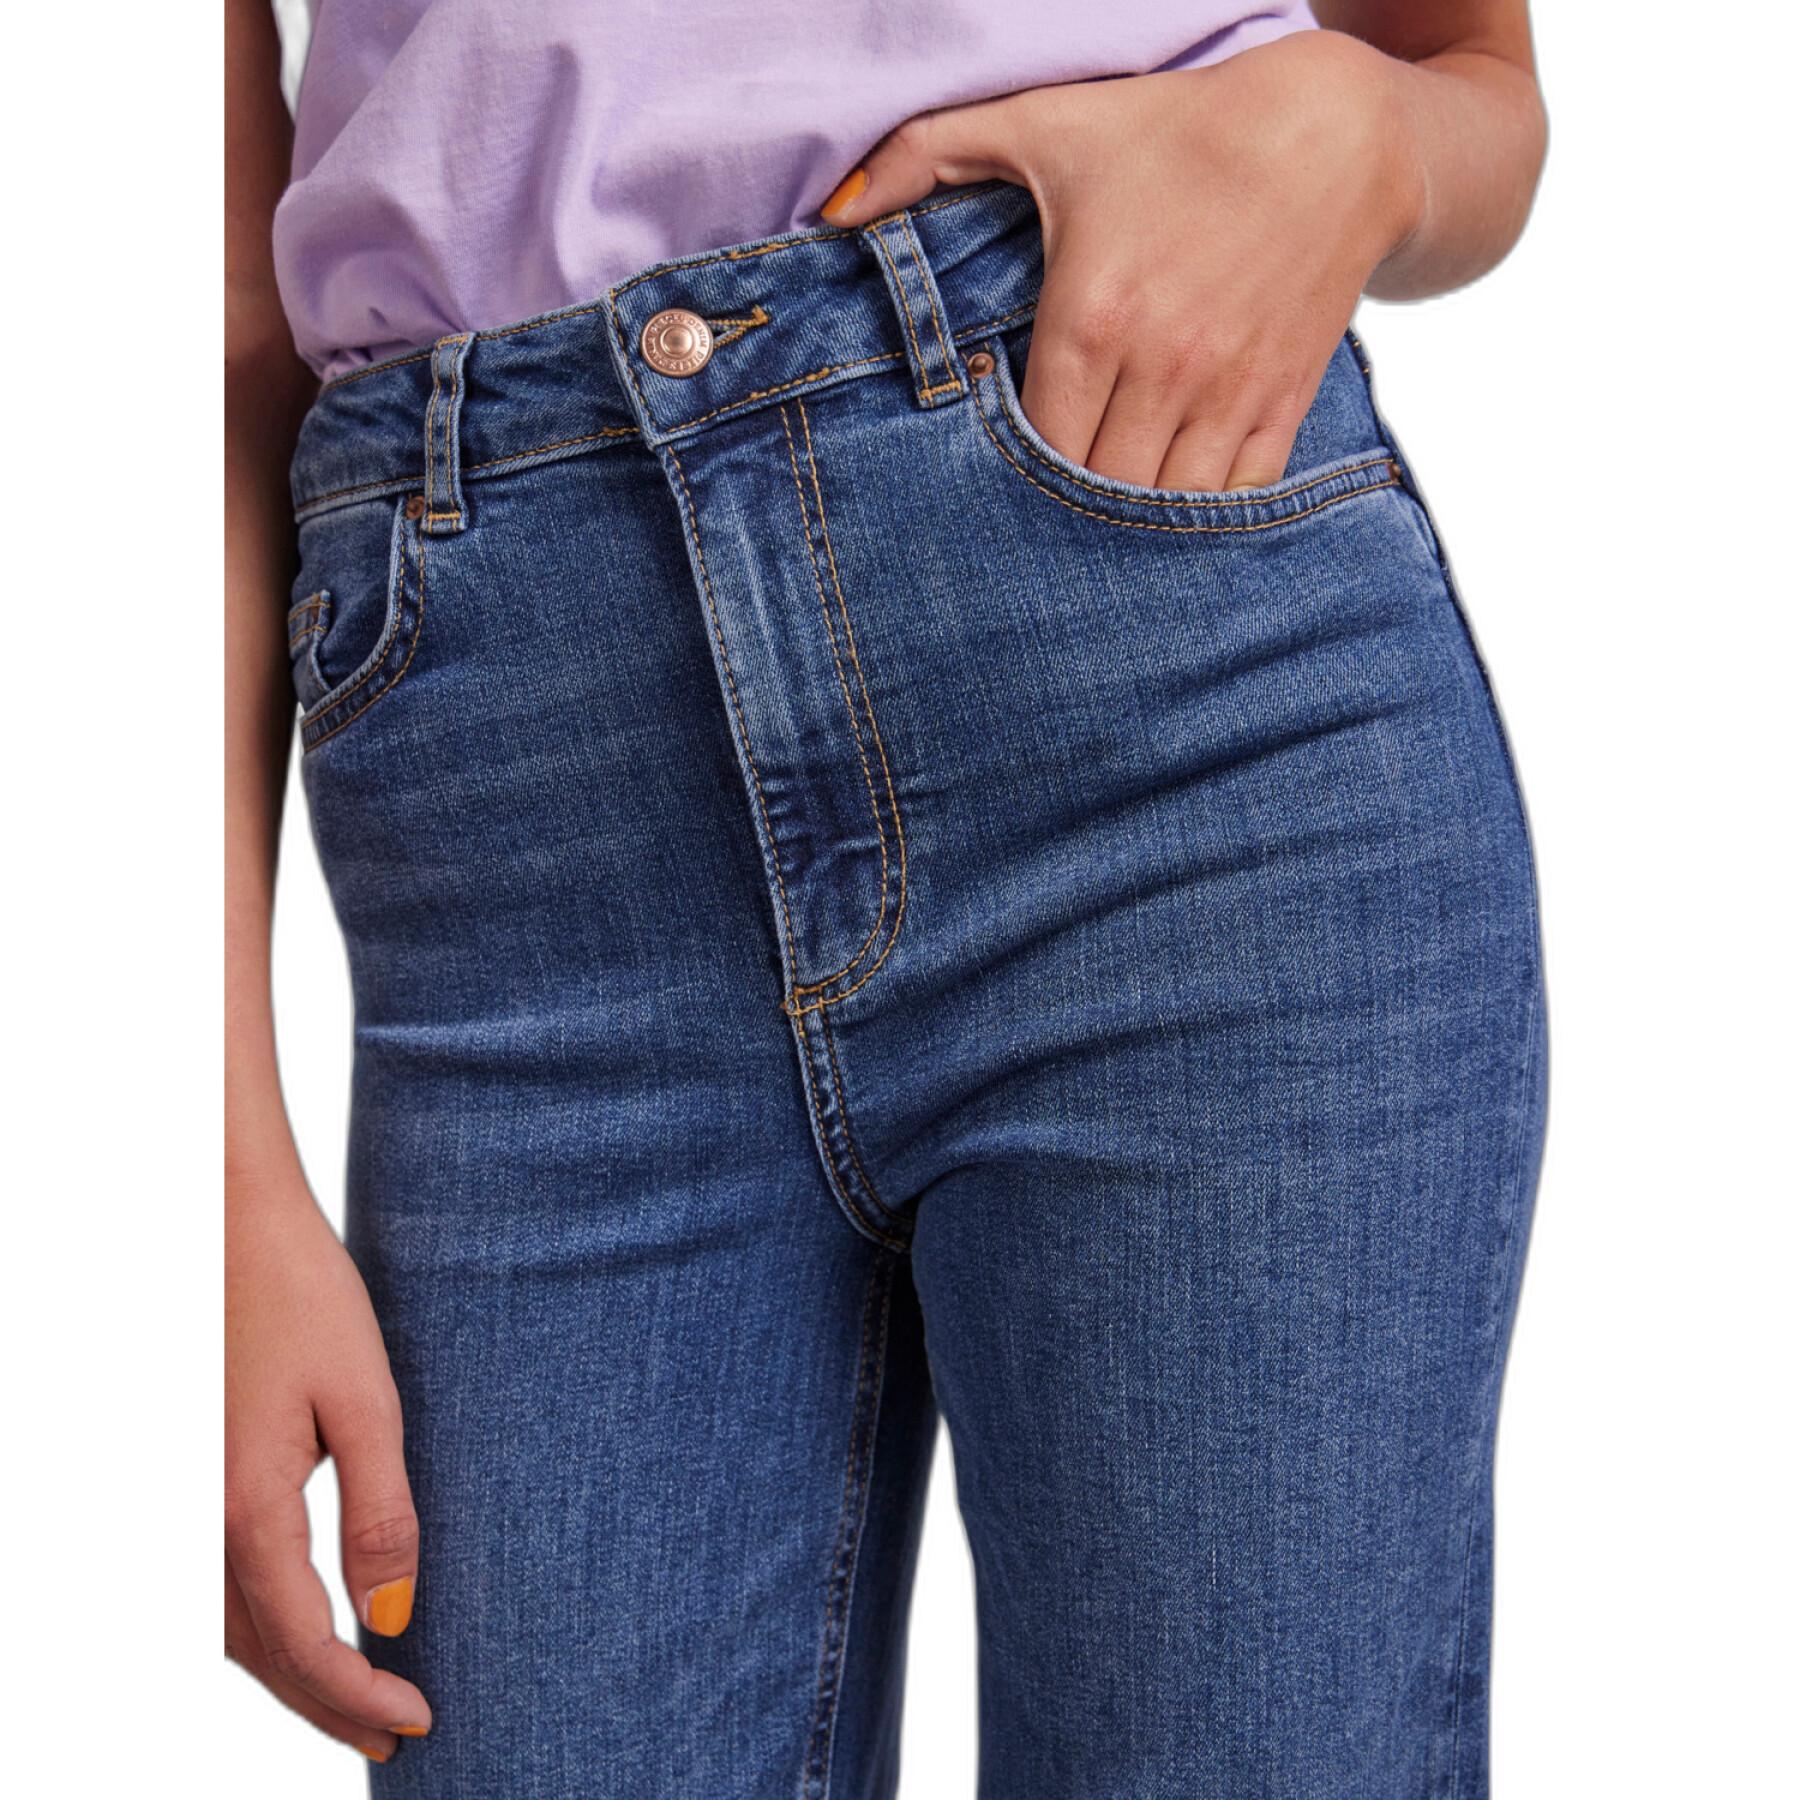 Women's straight jeans Pieces Delly